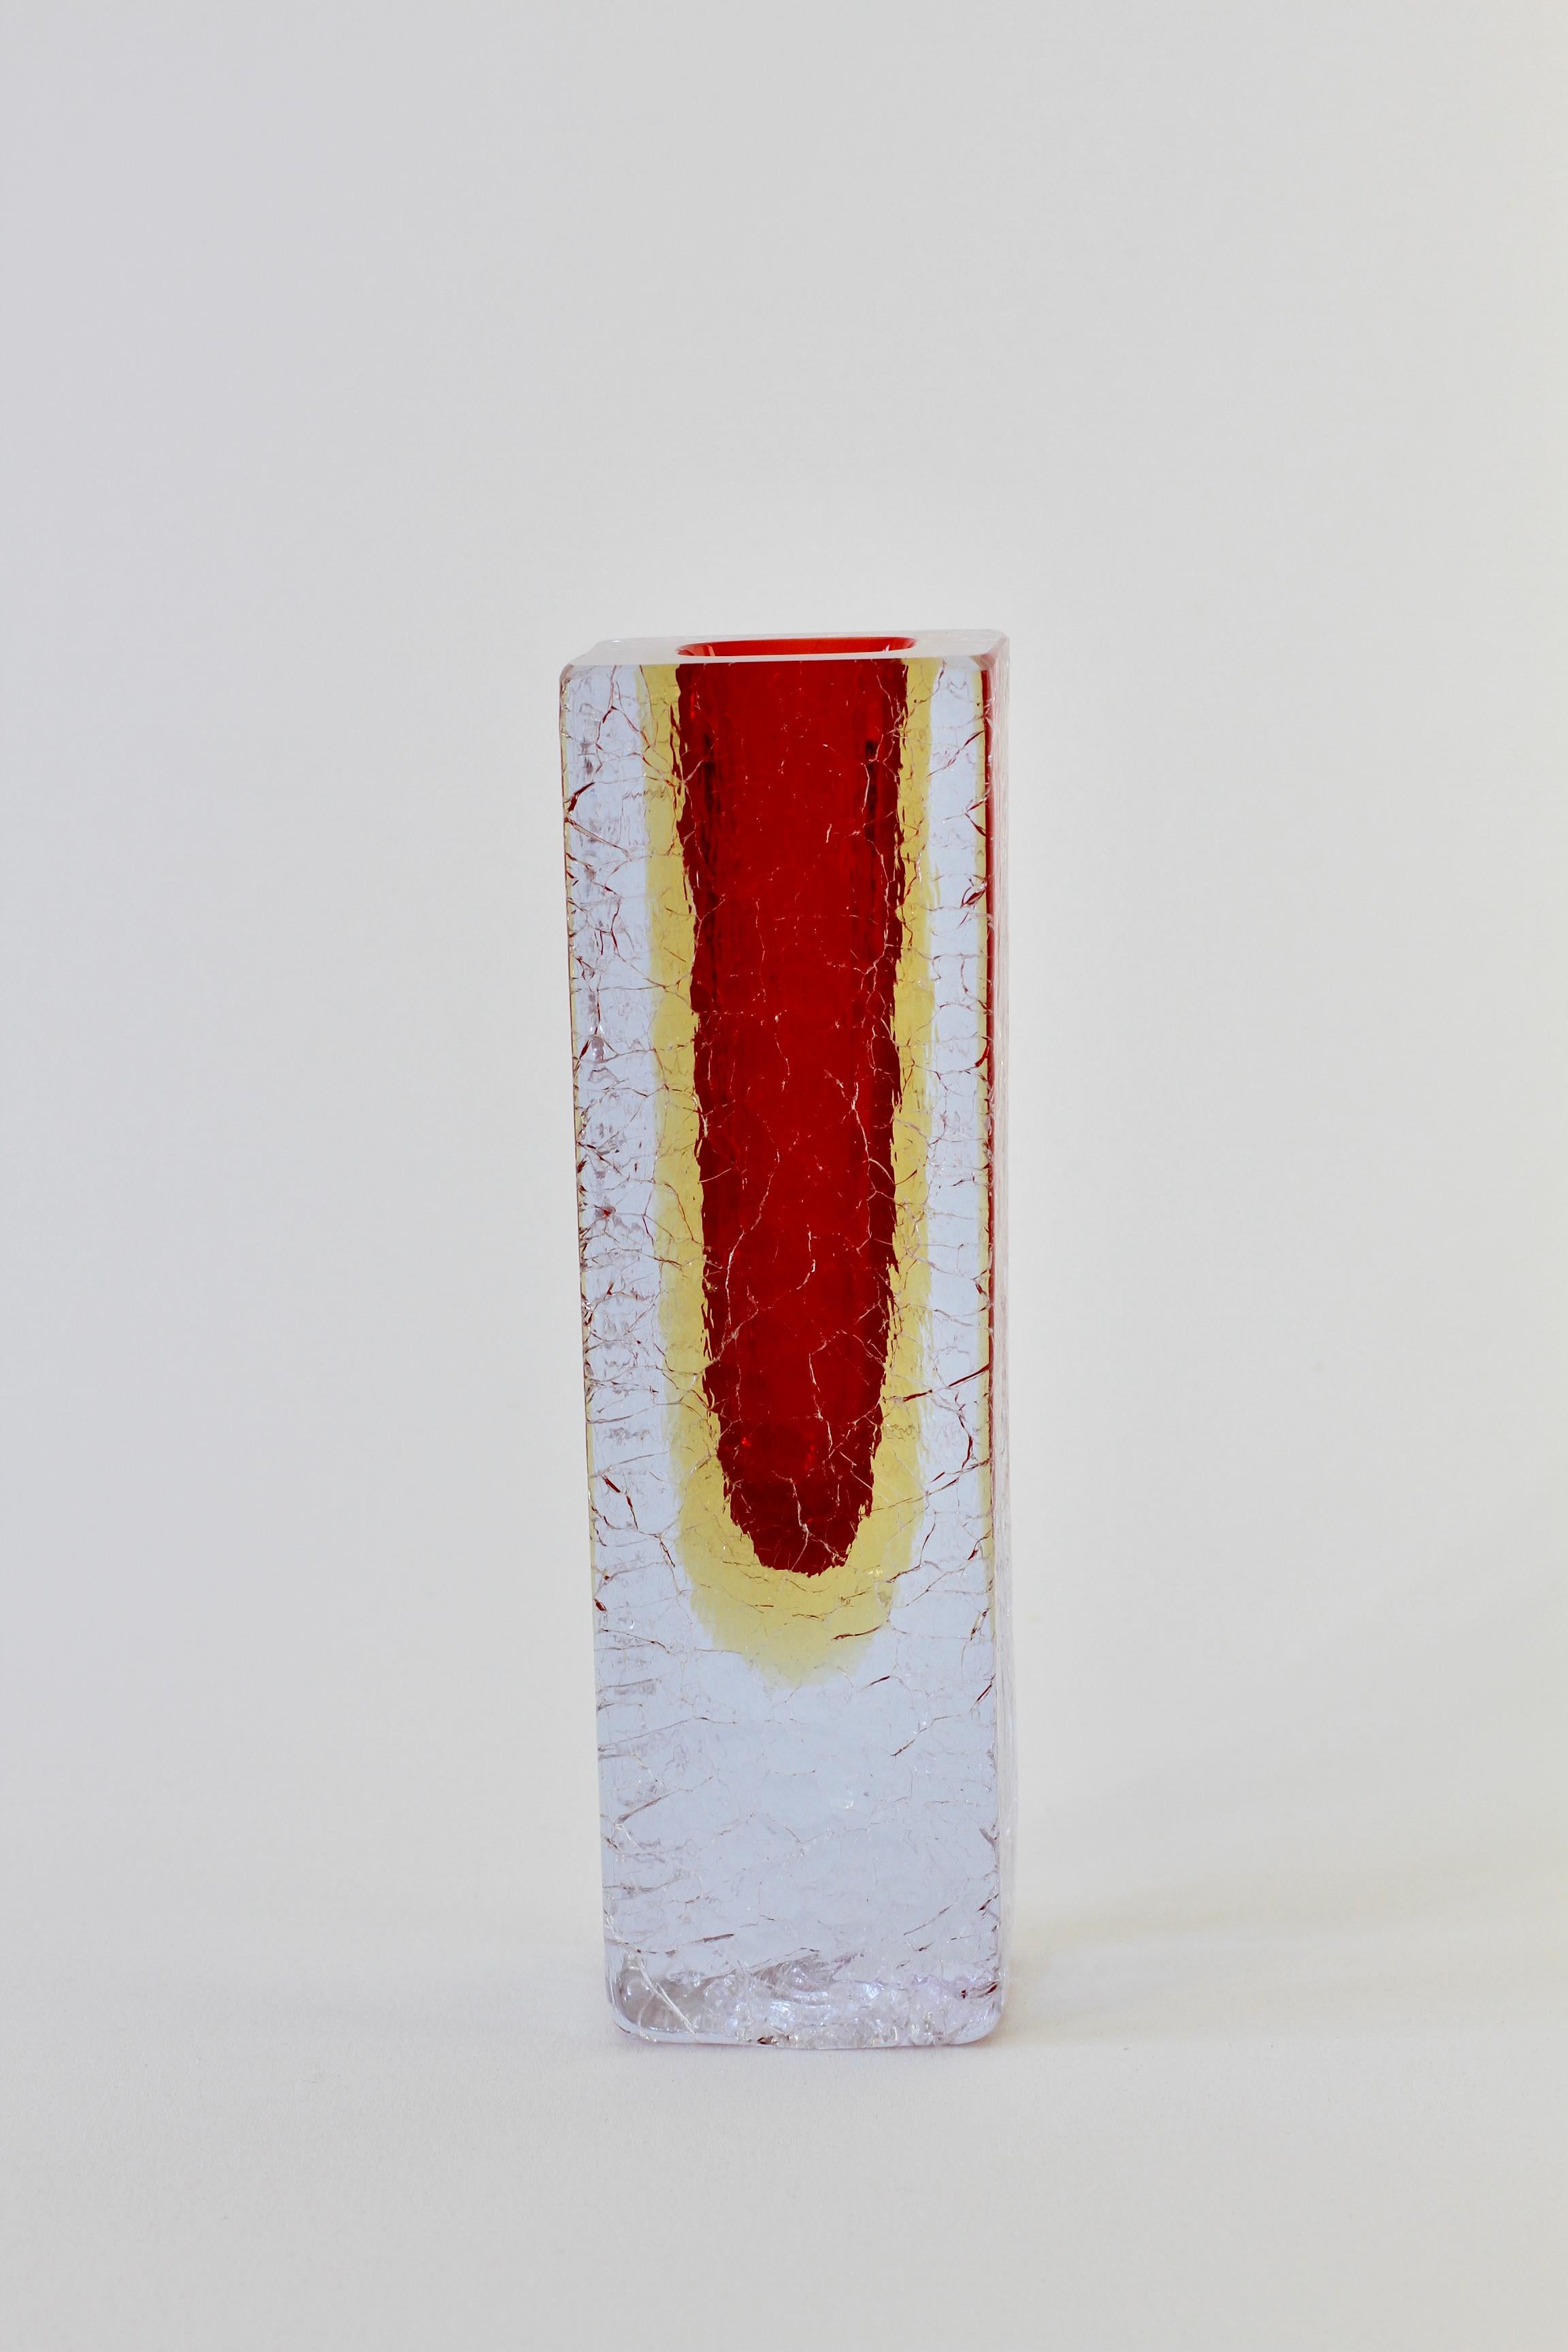 Faceted Red & Yellow Italian Murano 'Sommerso' Crackle Glass Vase, circa 1960s For Sale 1